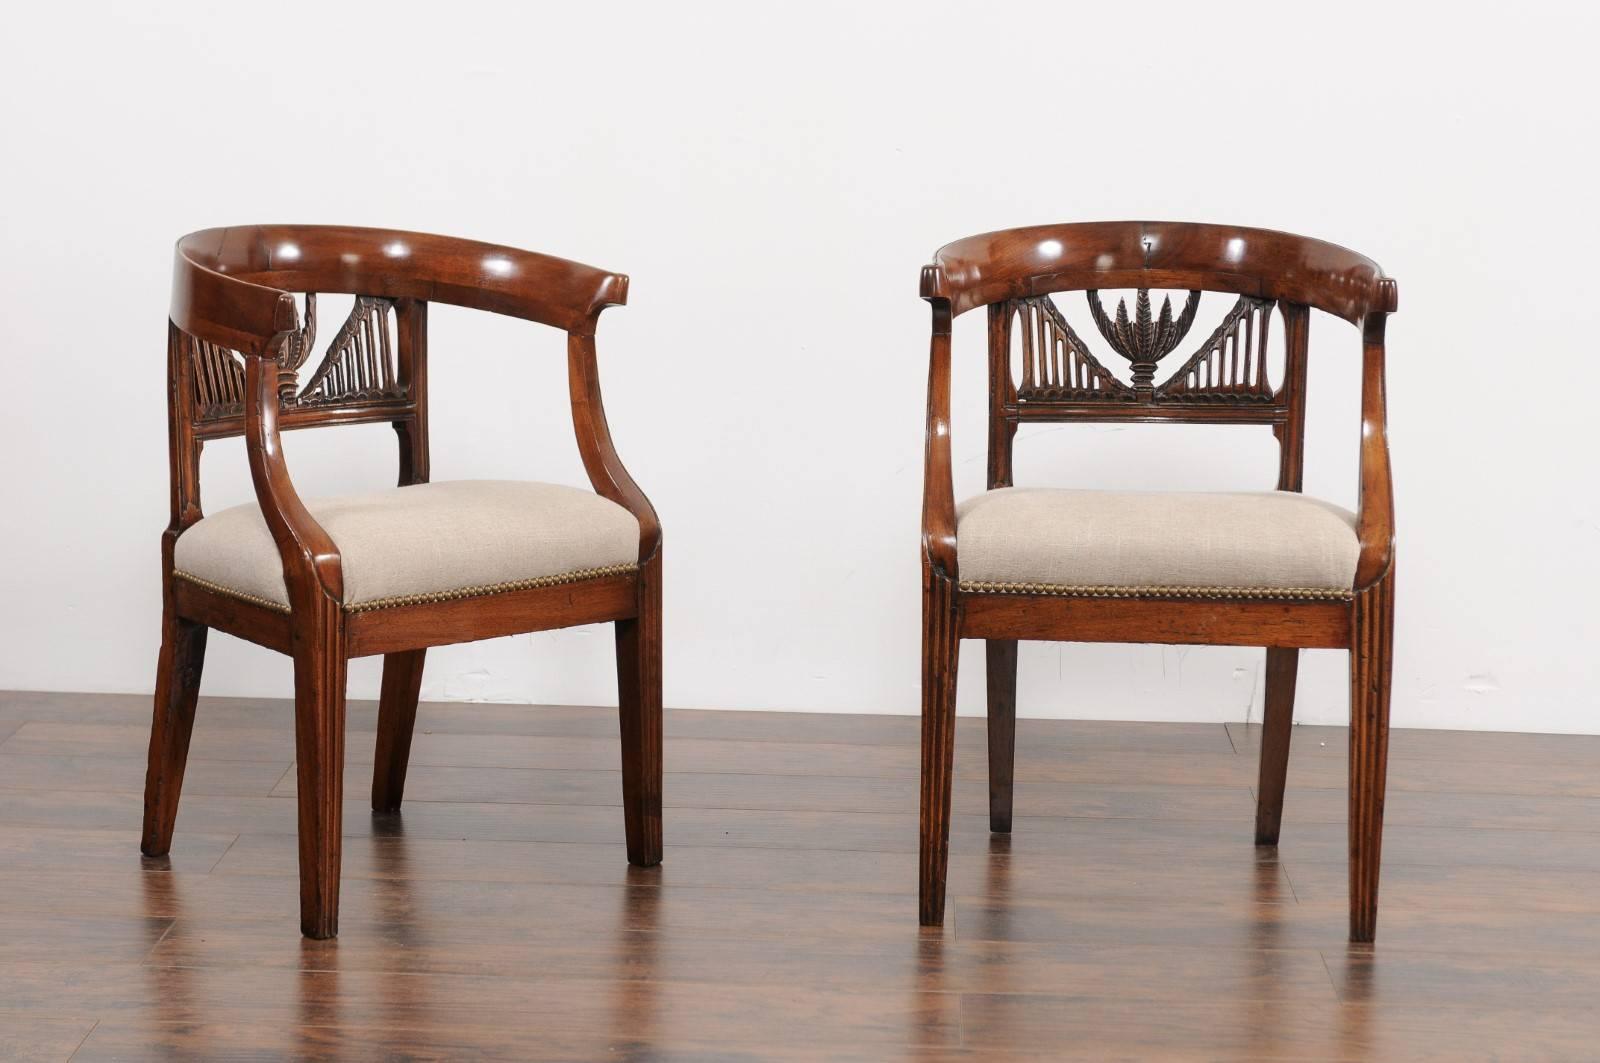 Two Italian walnut armchairs from the early 19th century with pierced splats, wraparound backs and new upholstery, priced and sold individually. Each of these Italian walnut armchairs features an exquisite wraparound back, adorned with an